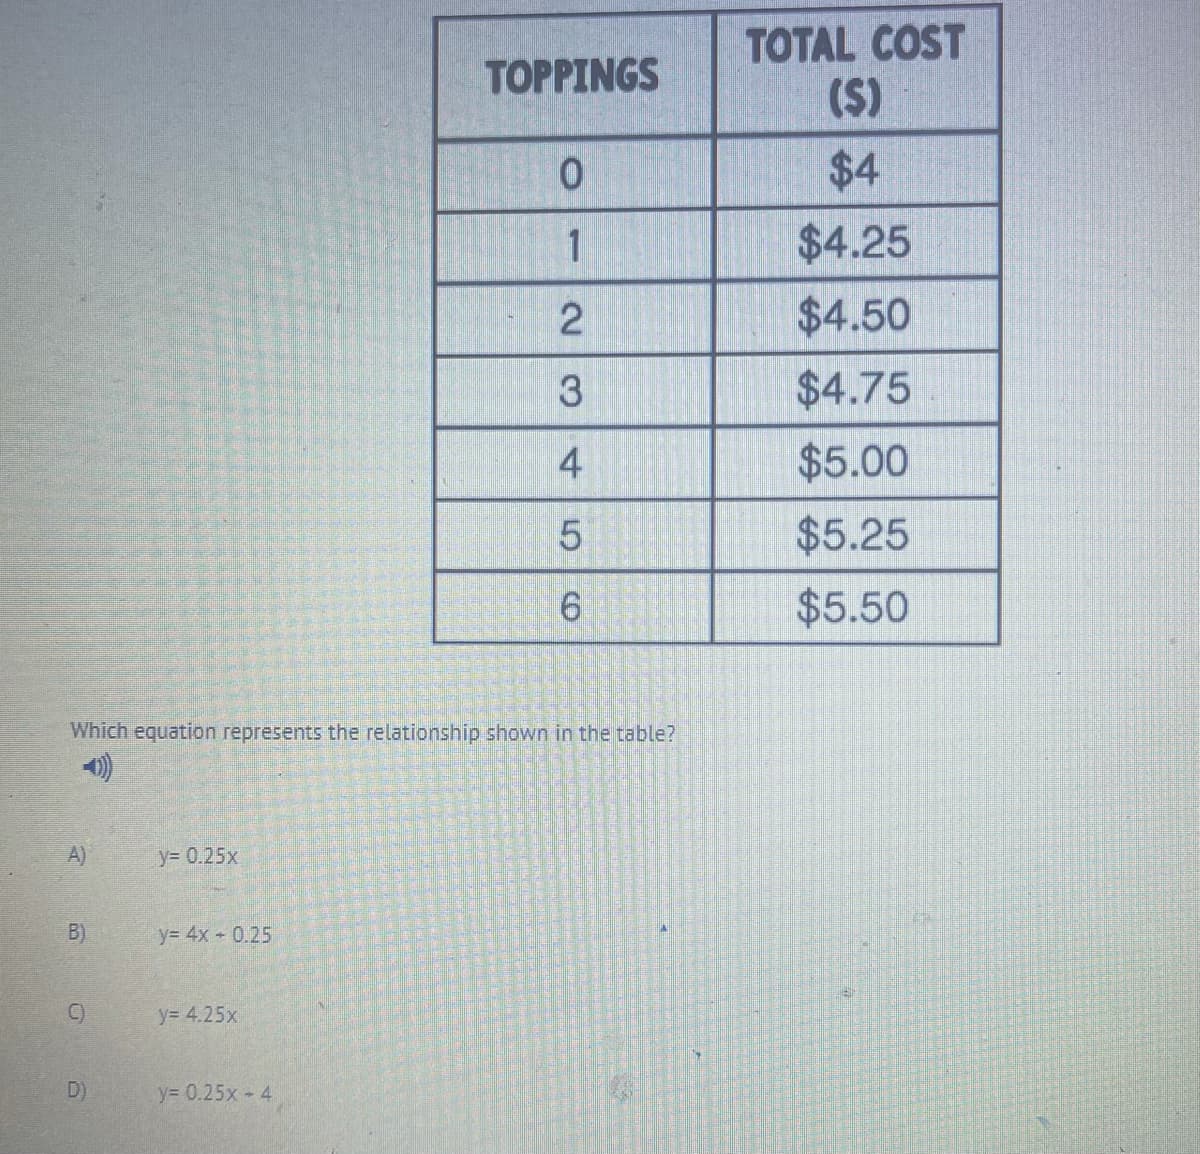 TOTAL COST
(S)
TOPPINGS
$4
1
$4.25
$4.50
$4.75
4
$5.00
$5.25
$5.50
Which equation represents the relationship shown in the table?
A)
y= 0.25x
B)
y= 4x 0.25
y= 4.25x
D)
y= 0.25x 4
